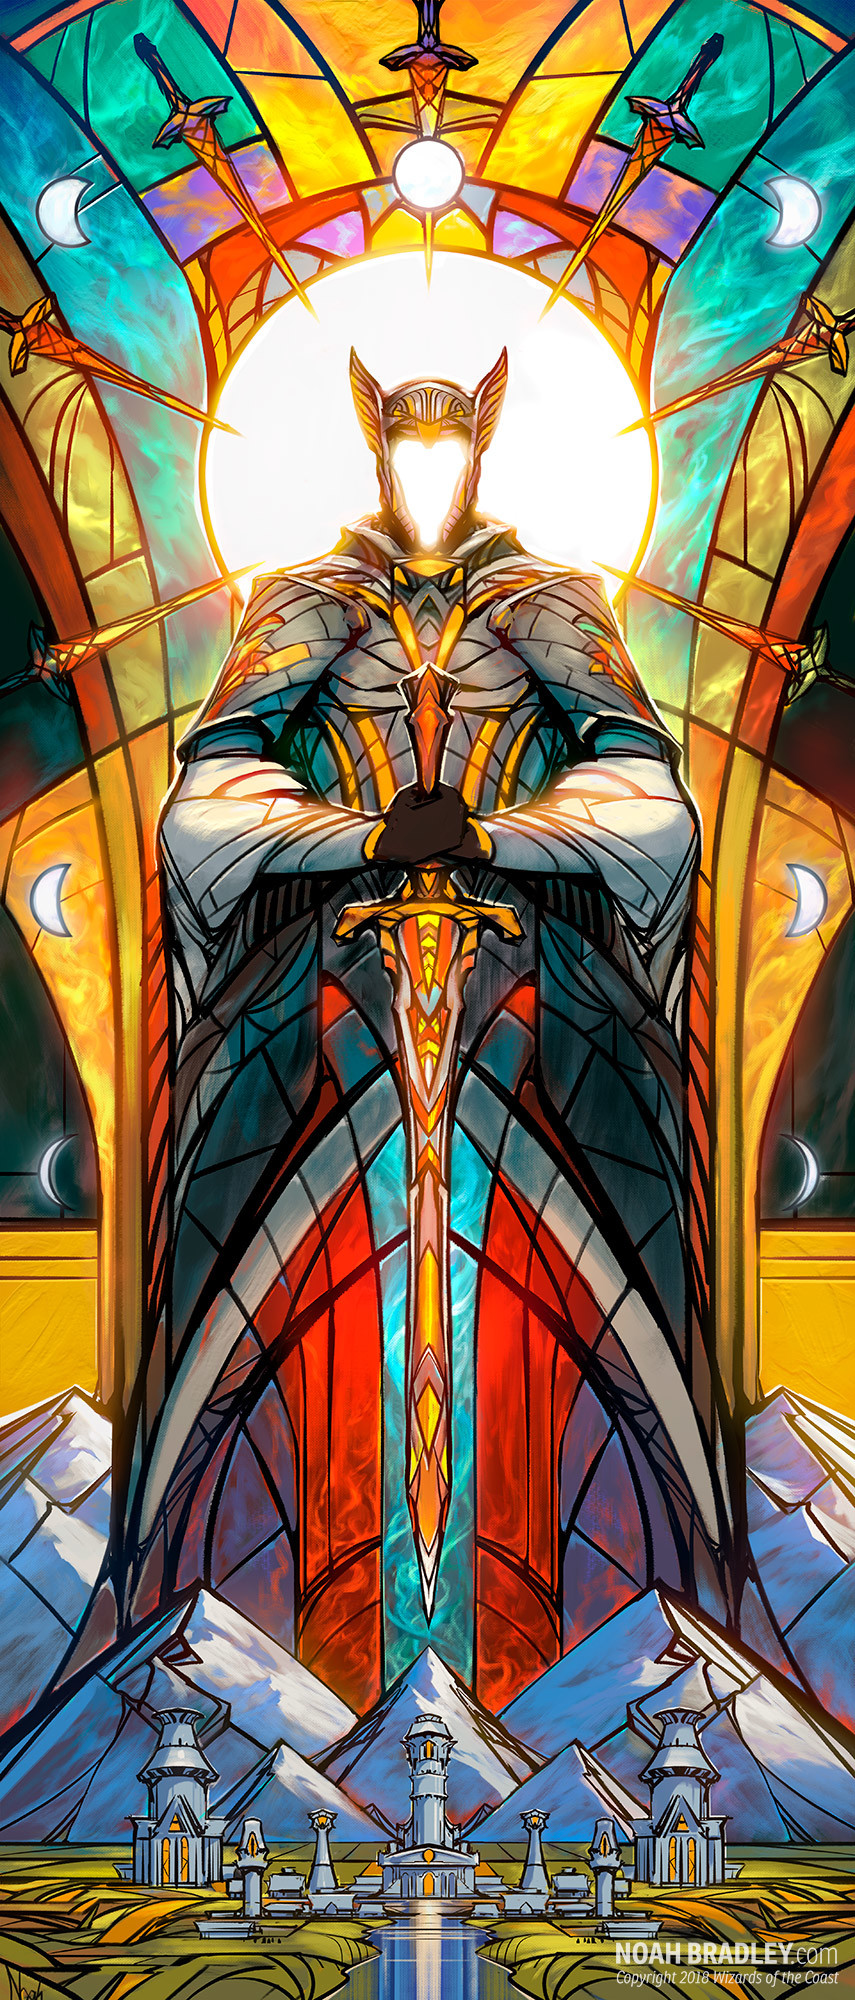 General 855x2000 Noah Bradley men stained glass glass sword Kingdom colorful king 9:21 Magic: The Gathering